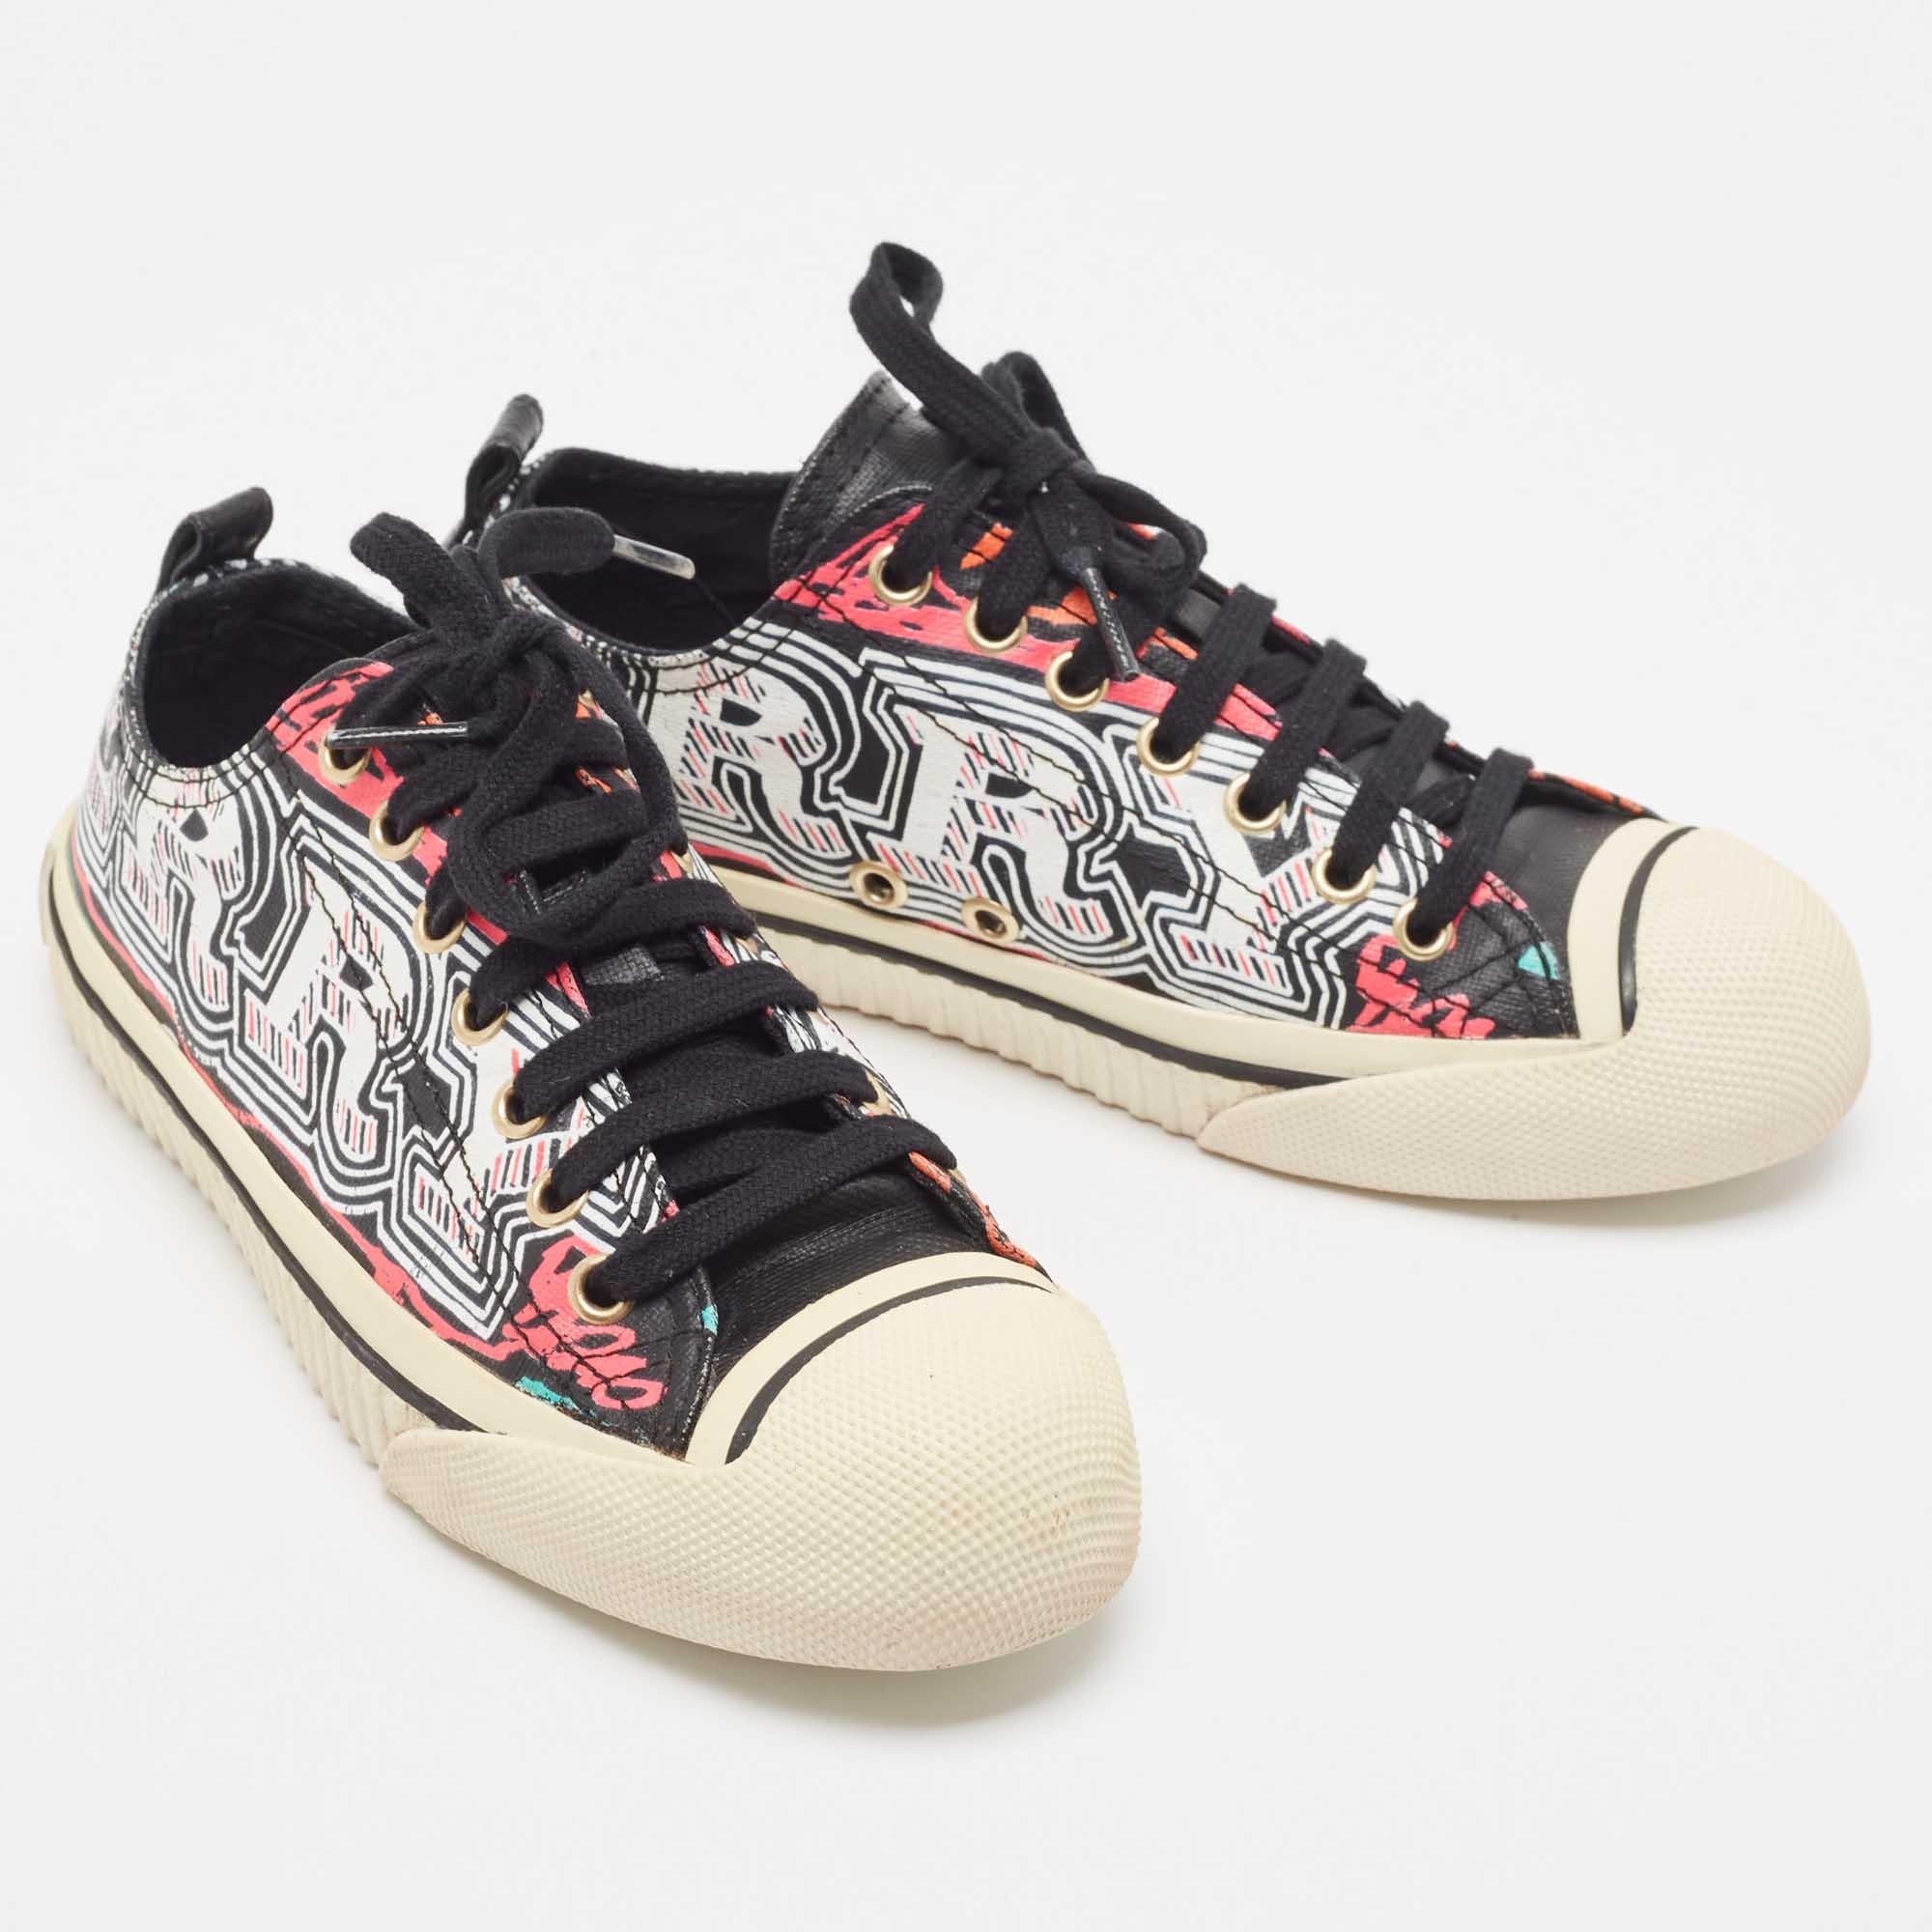 Burberry Multicolor Coated Canvas Kingly Mark Print Low Top Sneakers Size 35 In Good Condition For Sale In Dubai, Al Qouz 2